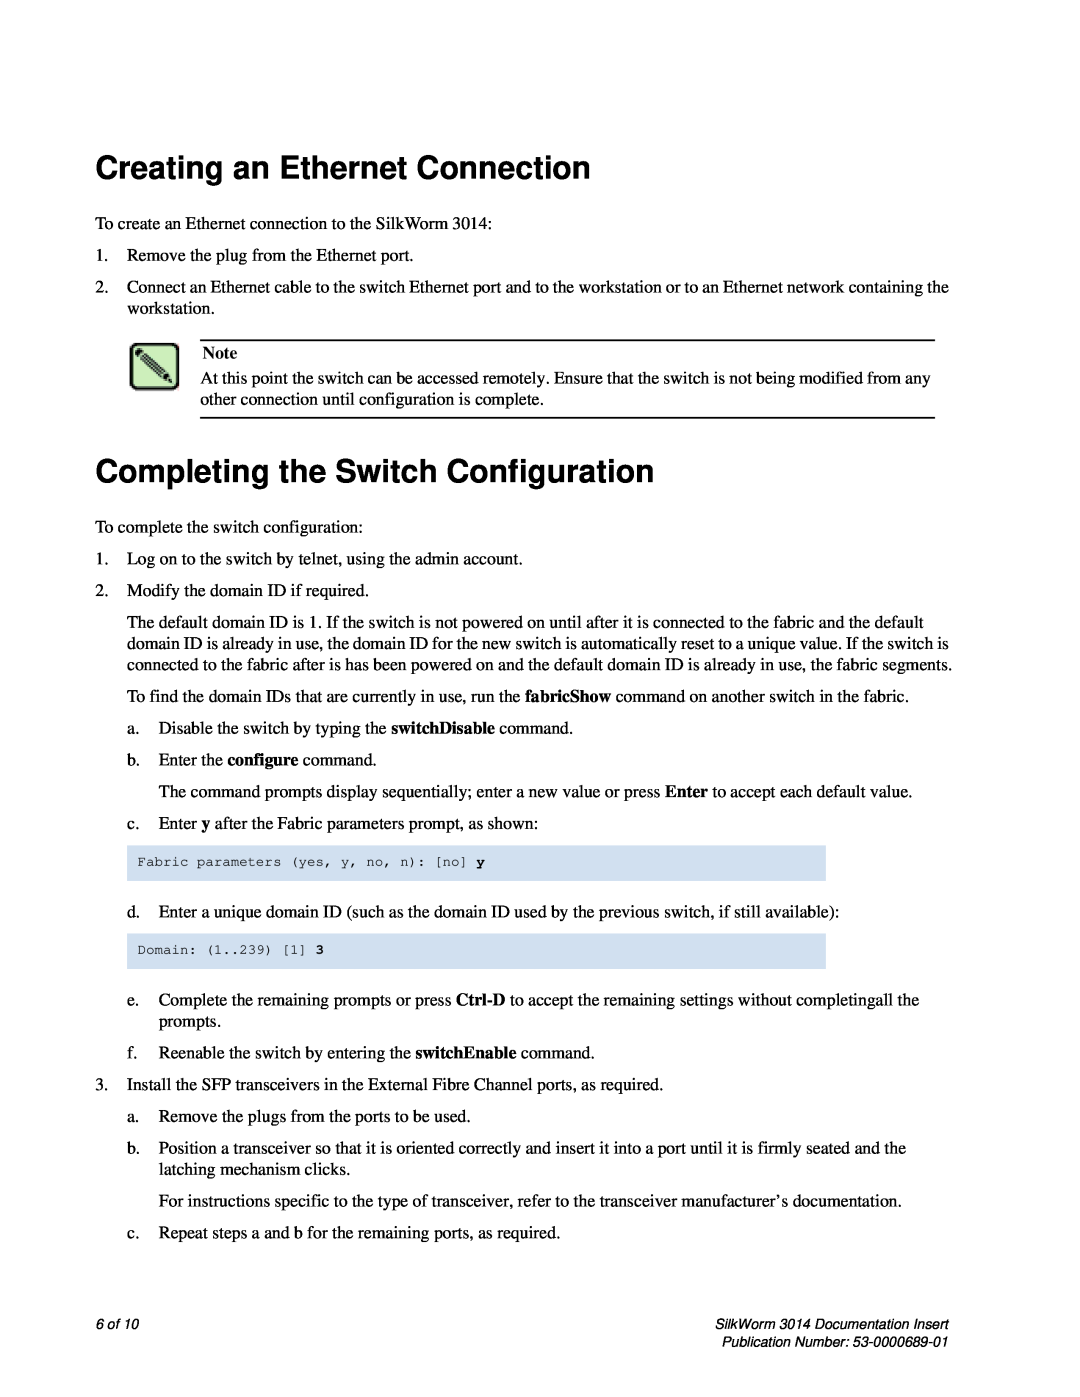 Brocade Communications Systems 3014 quick start Creating an Ethernet Connection, Completing the Switch Configuration 